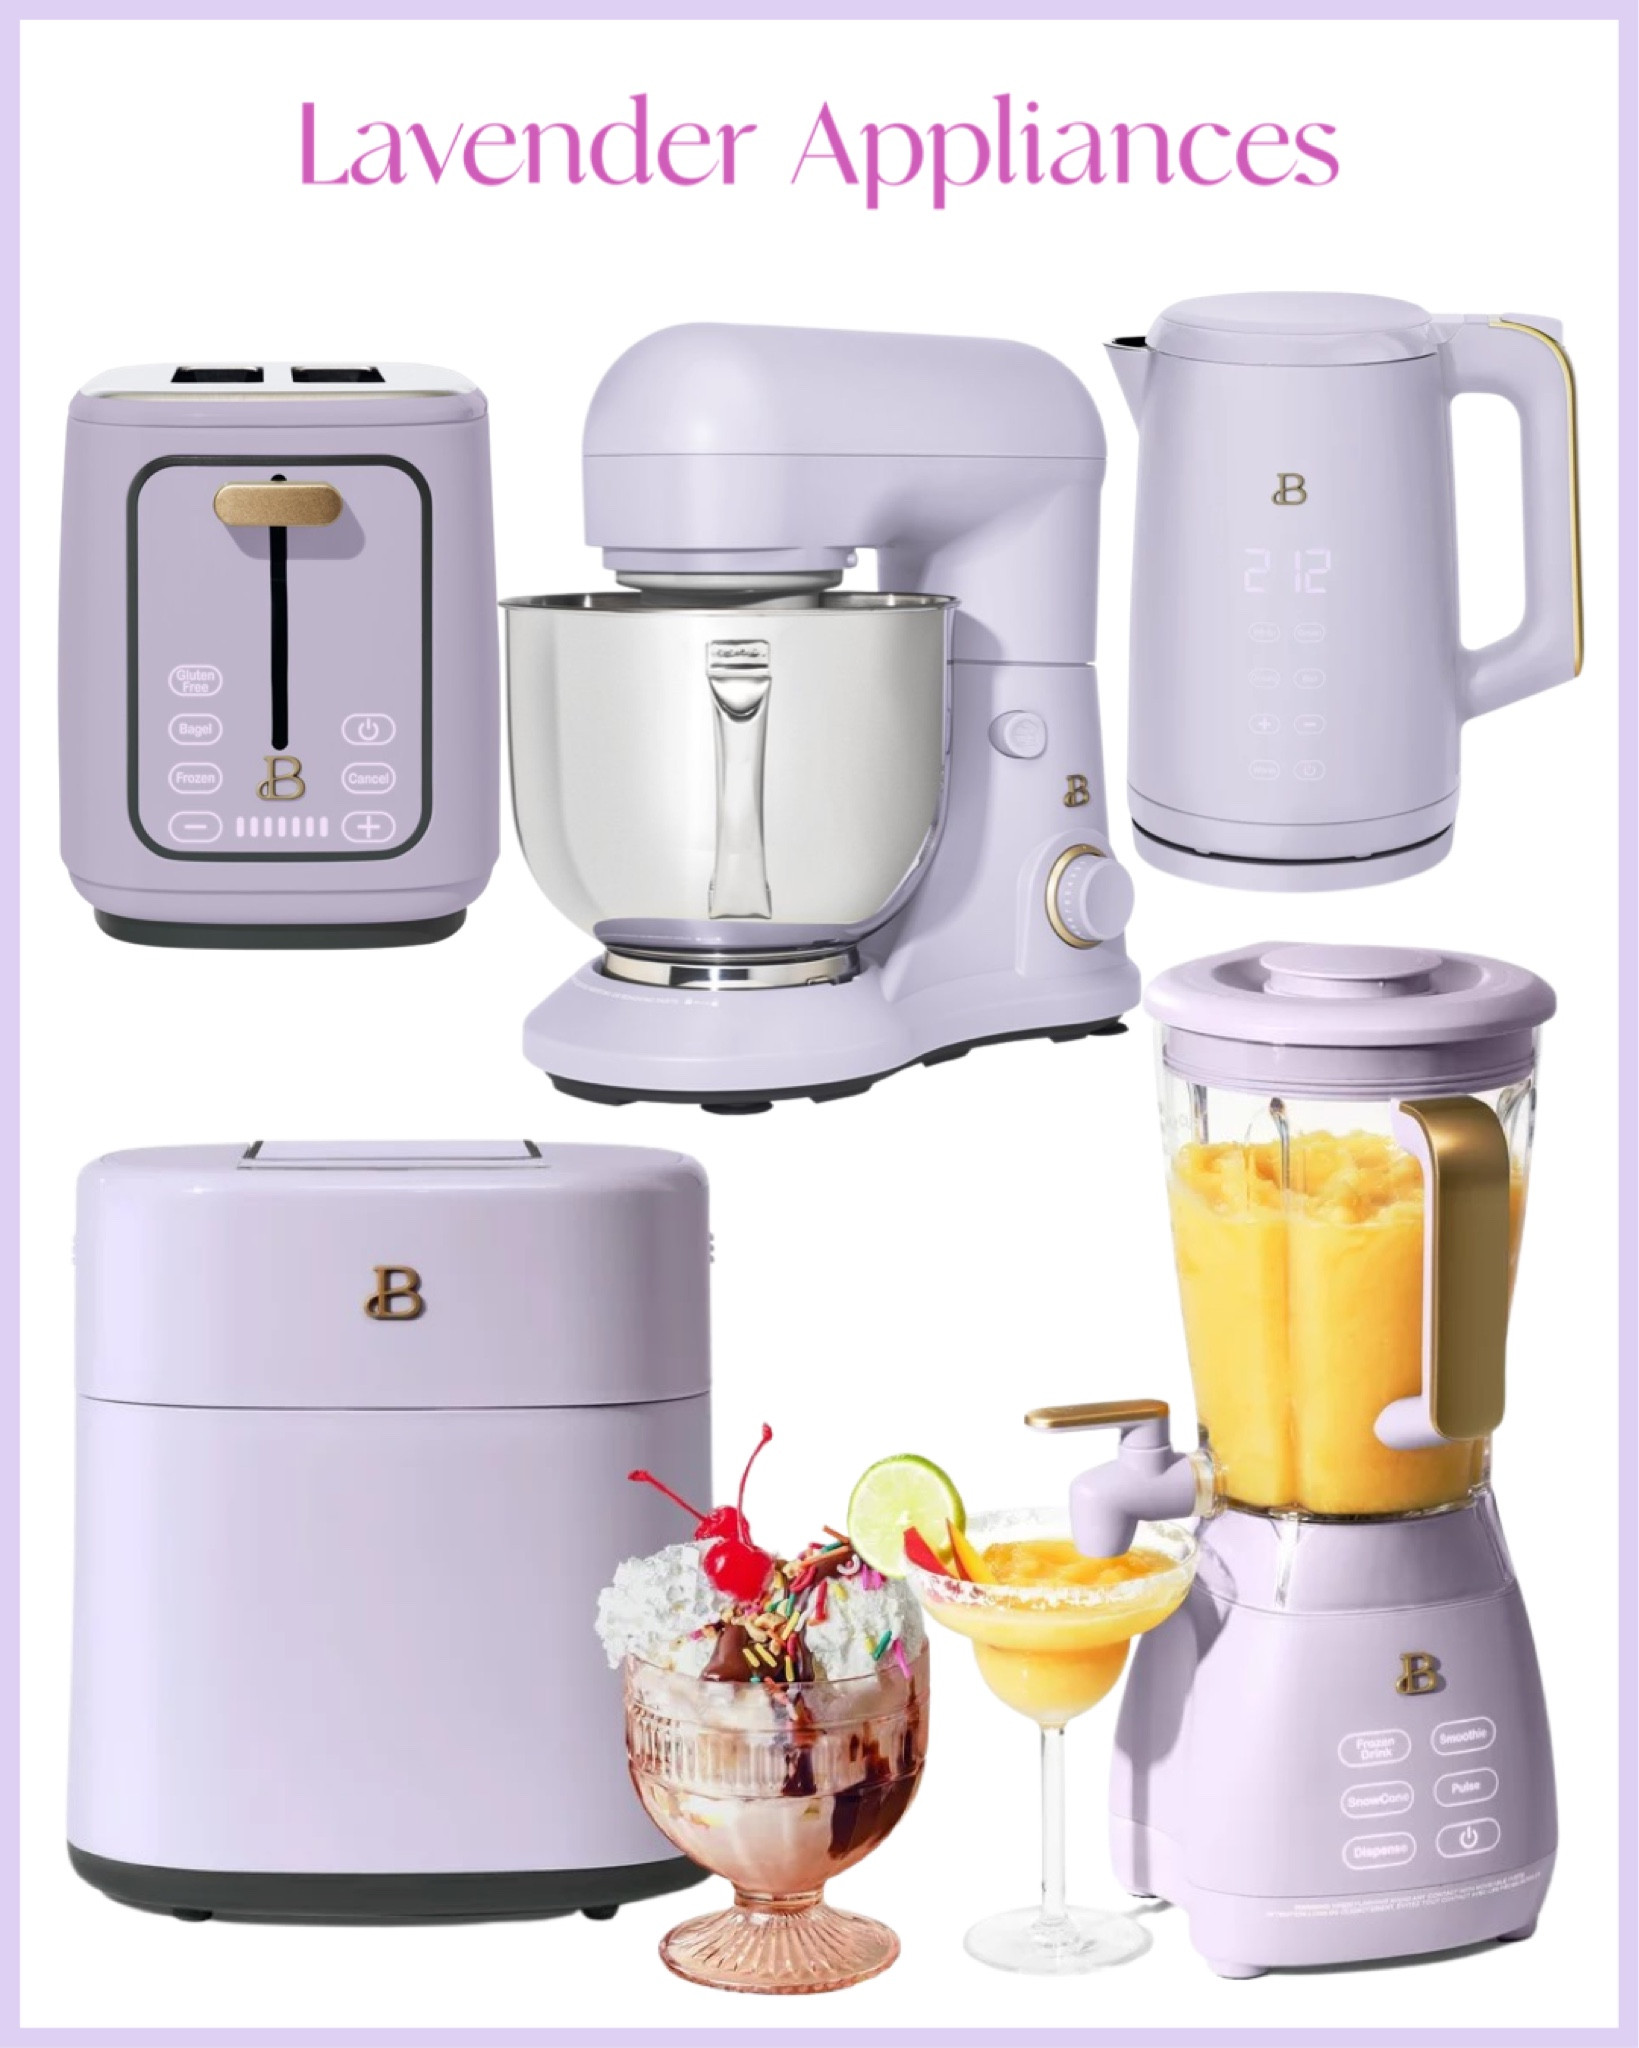 Drew Barrymore Beautiful Stand Mixer Review - Sugar Love Chic